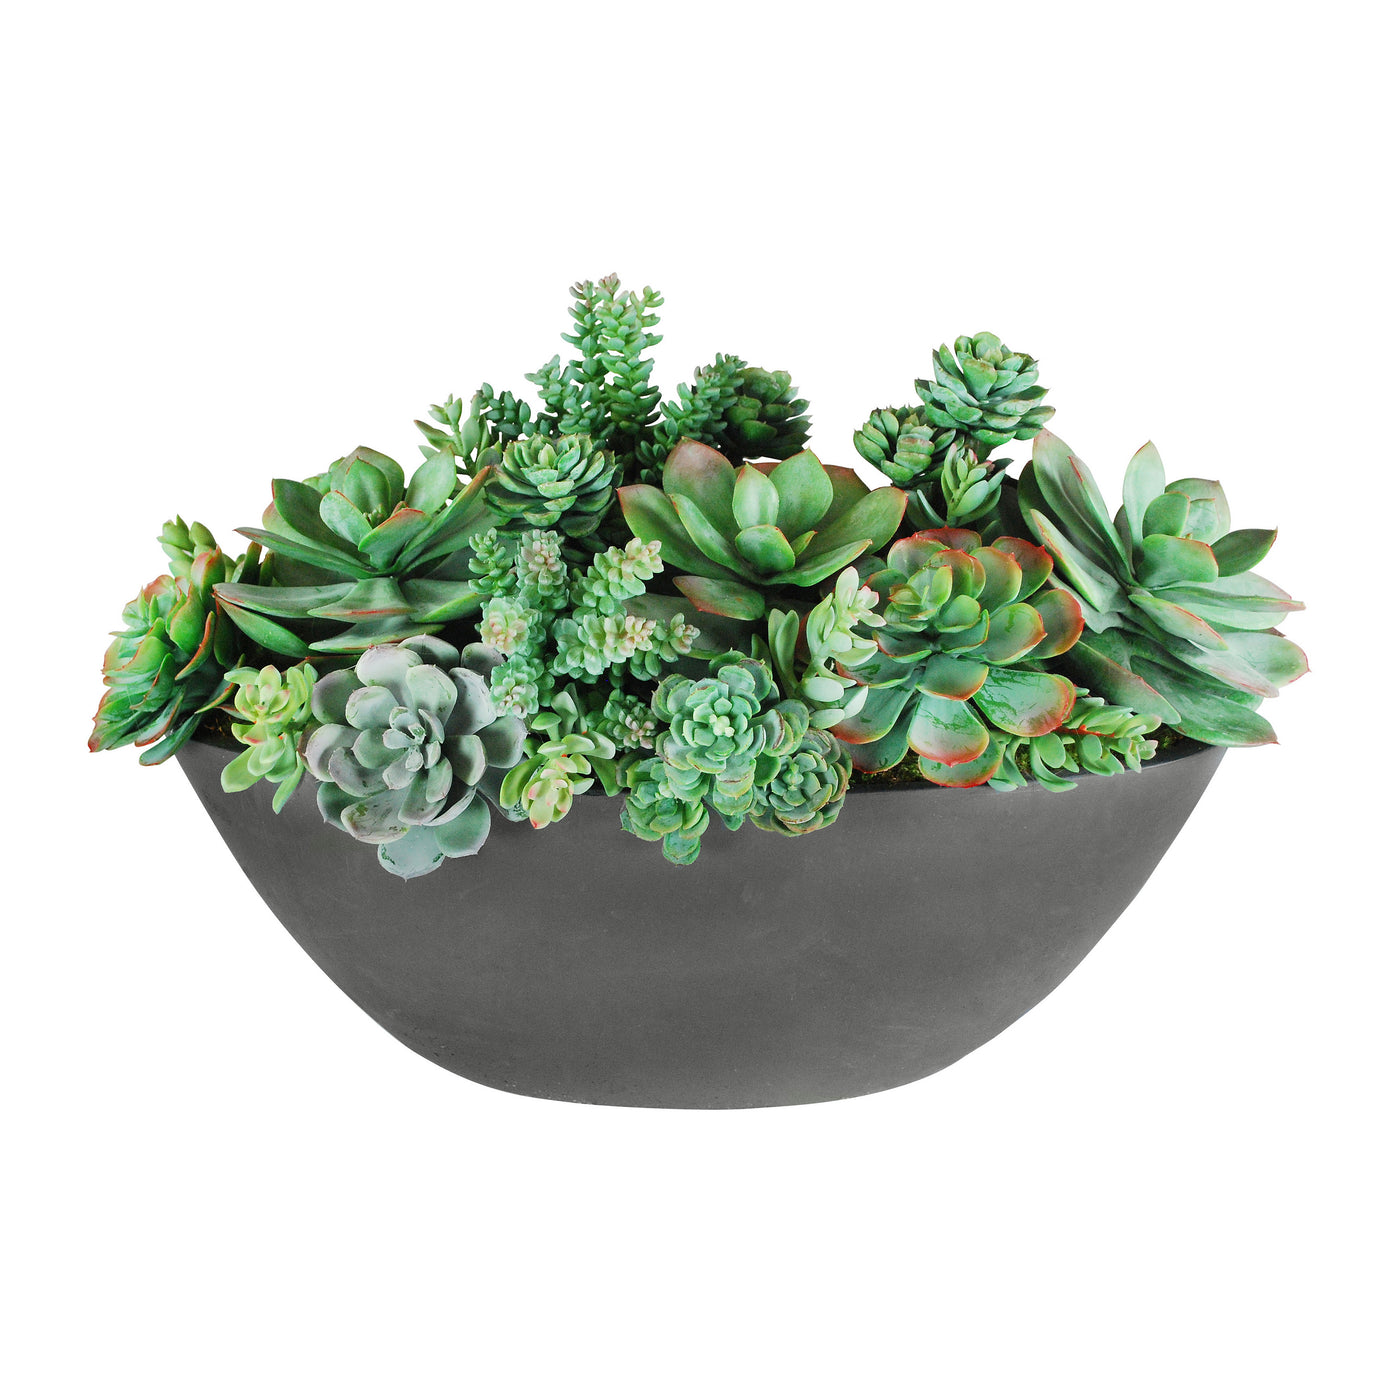 SUCCULENT MIX IN OVAL PLANTER 14"